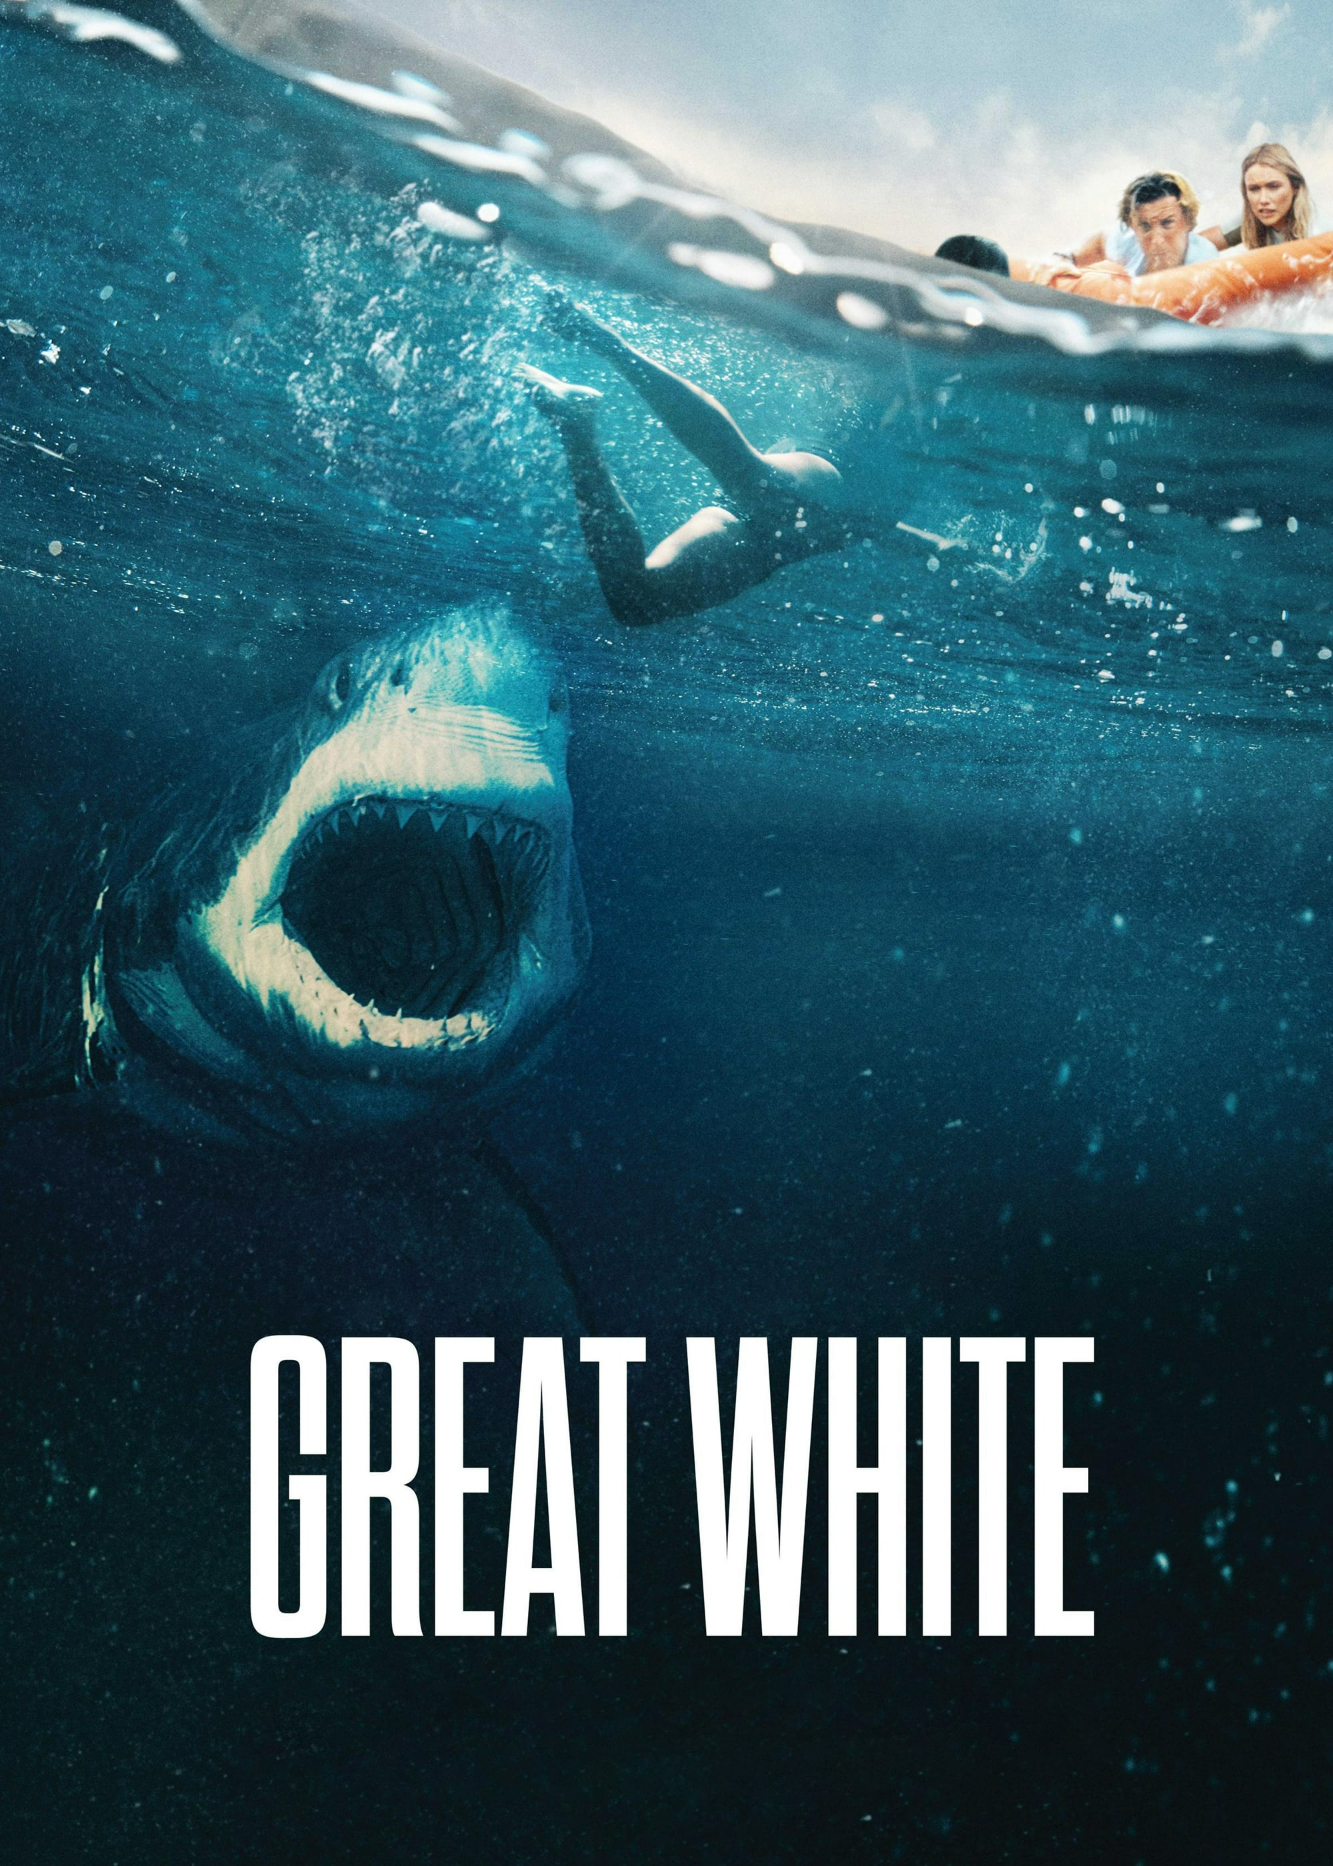 Poster Phim Hung Thần Trắng (Great White)